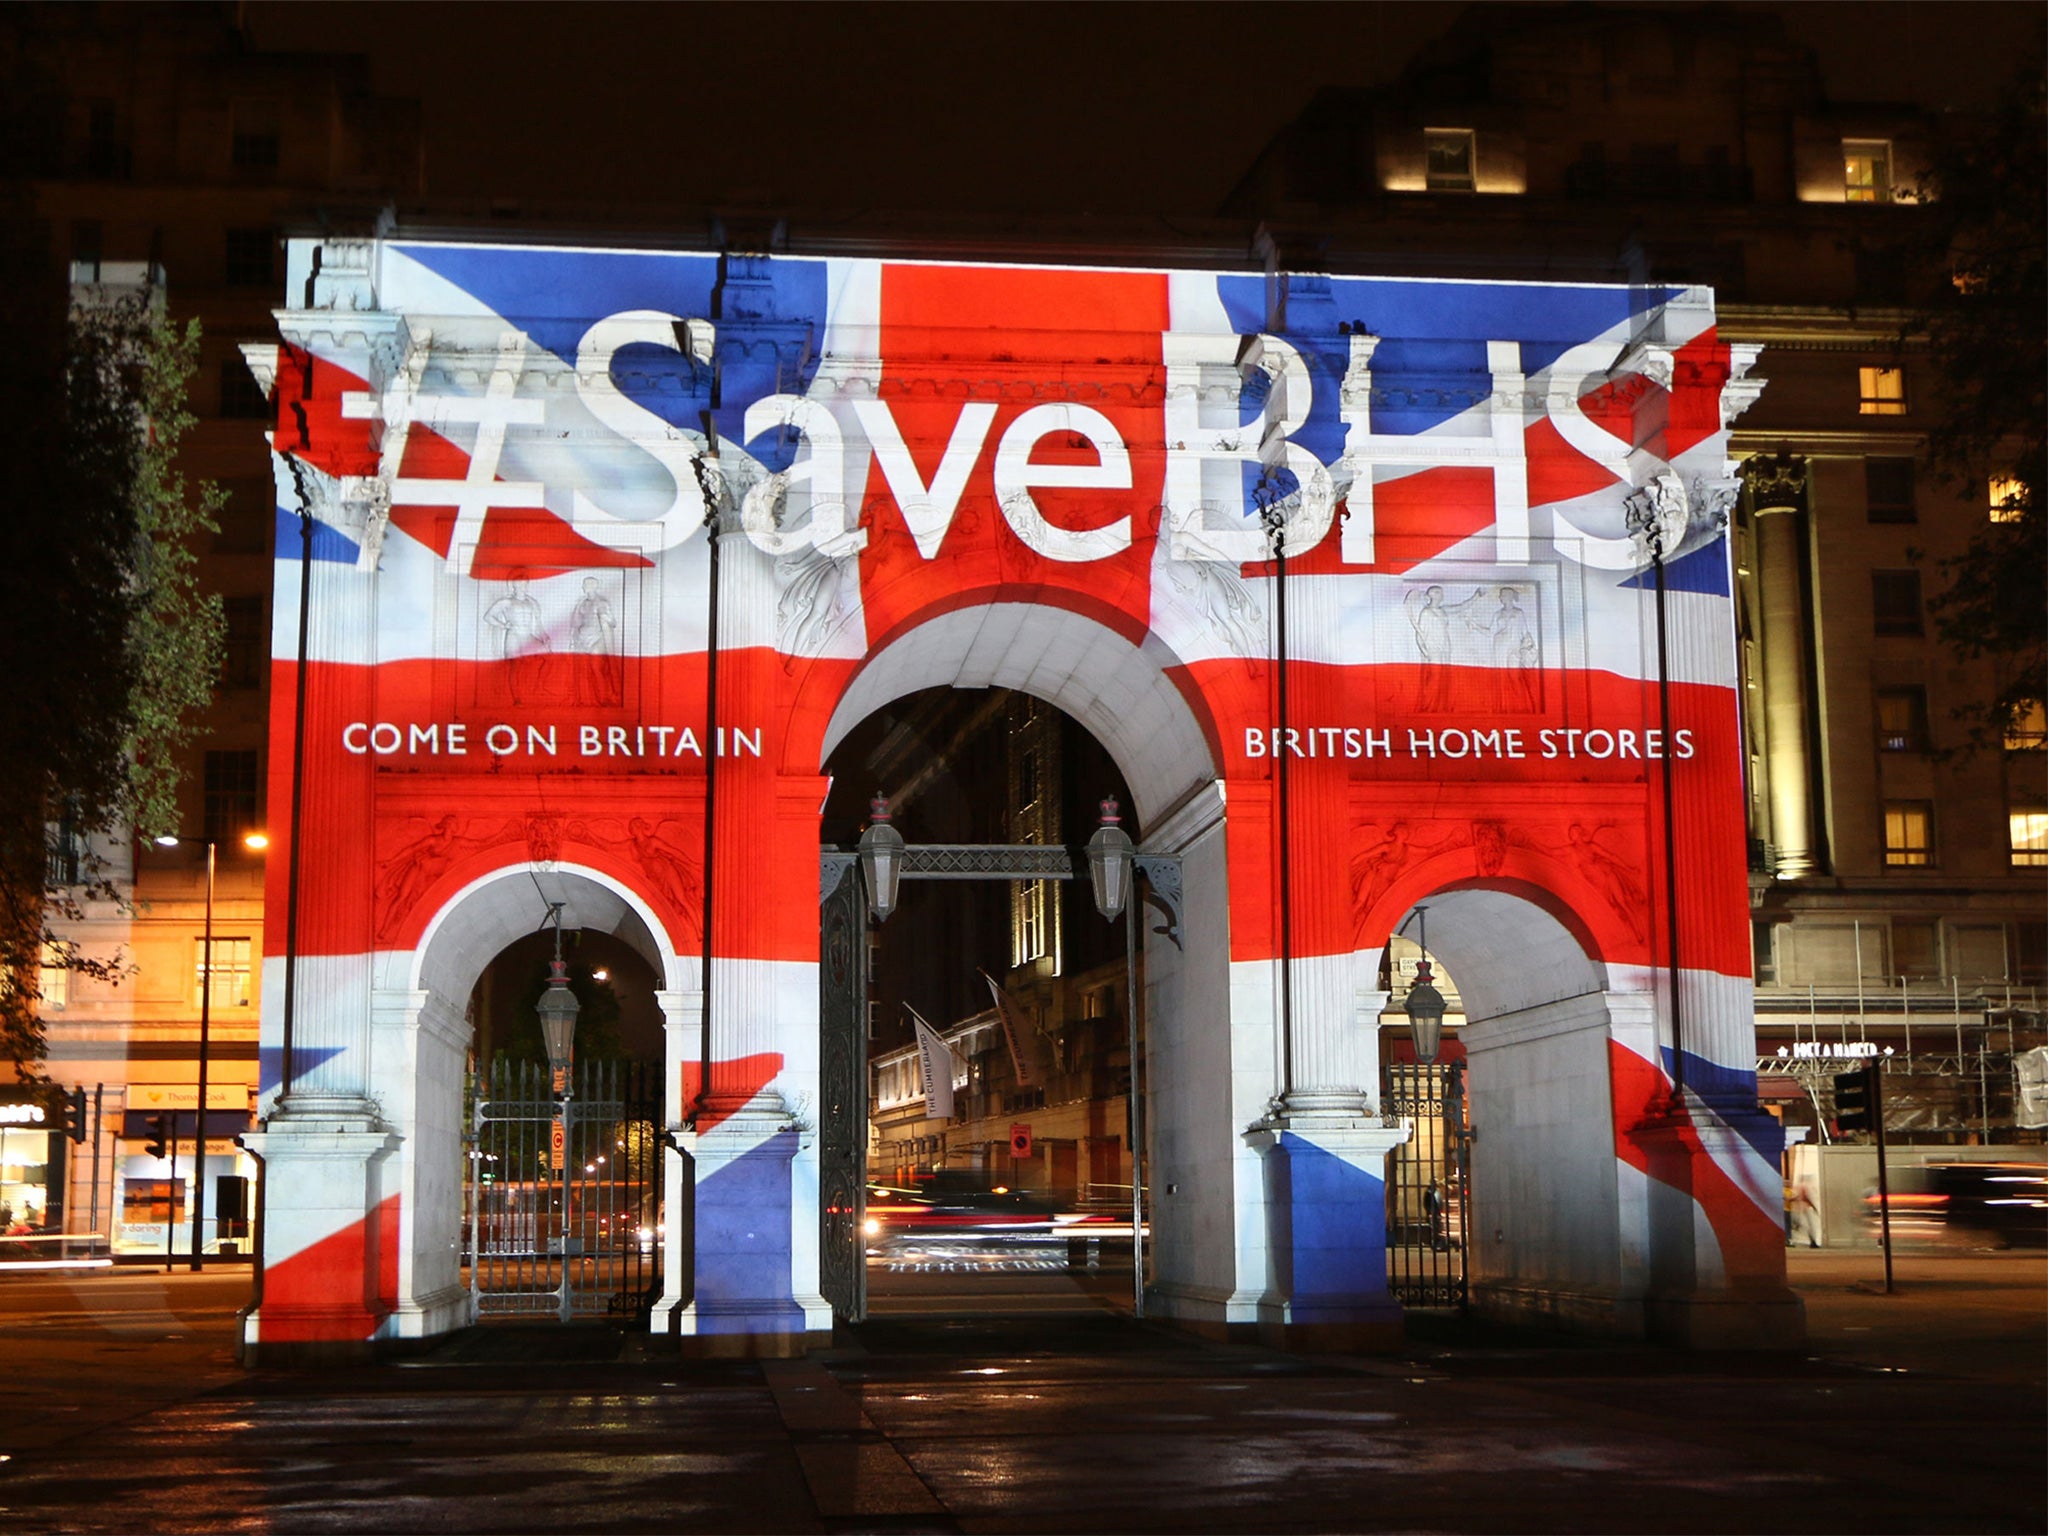 A message projected on to Marble Arch after news spread of the troubles faced by BHS